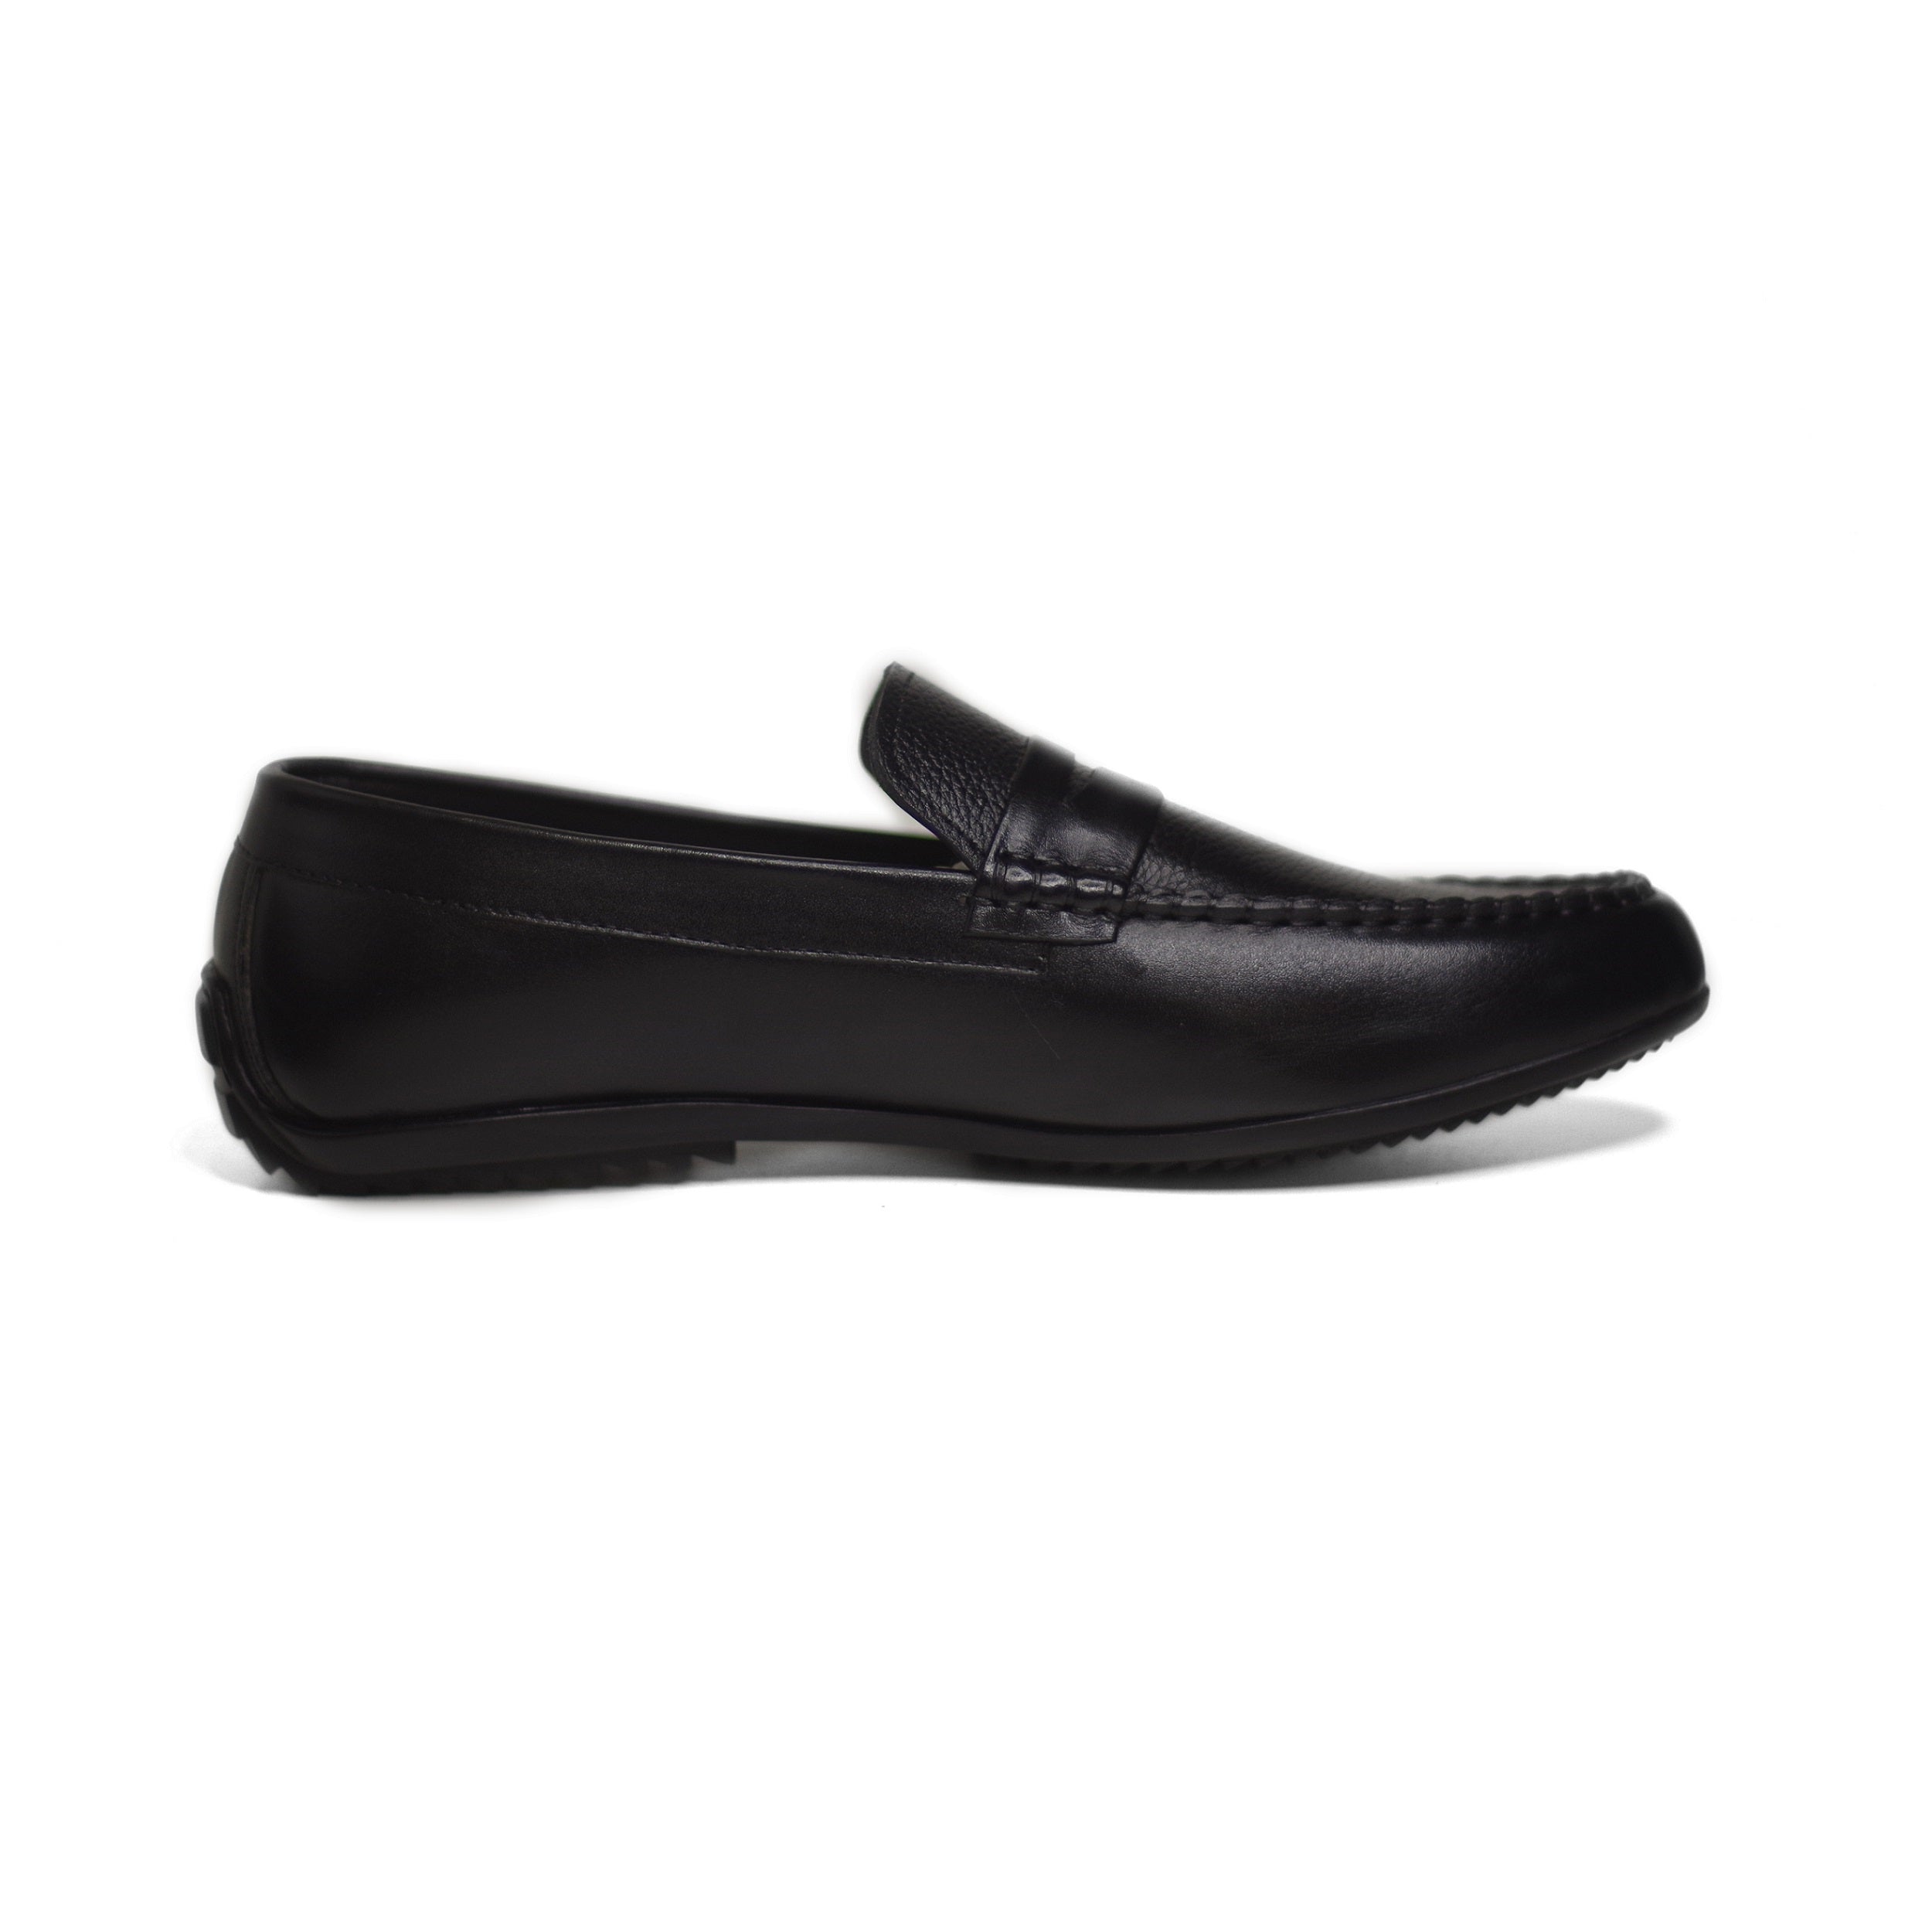 Black Grainy Leather Hand-Crafted Emperor Shoes/Loafers For Men